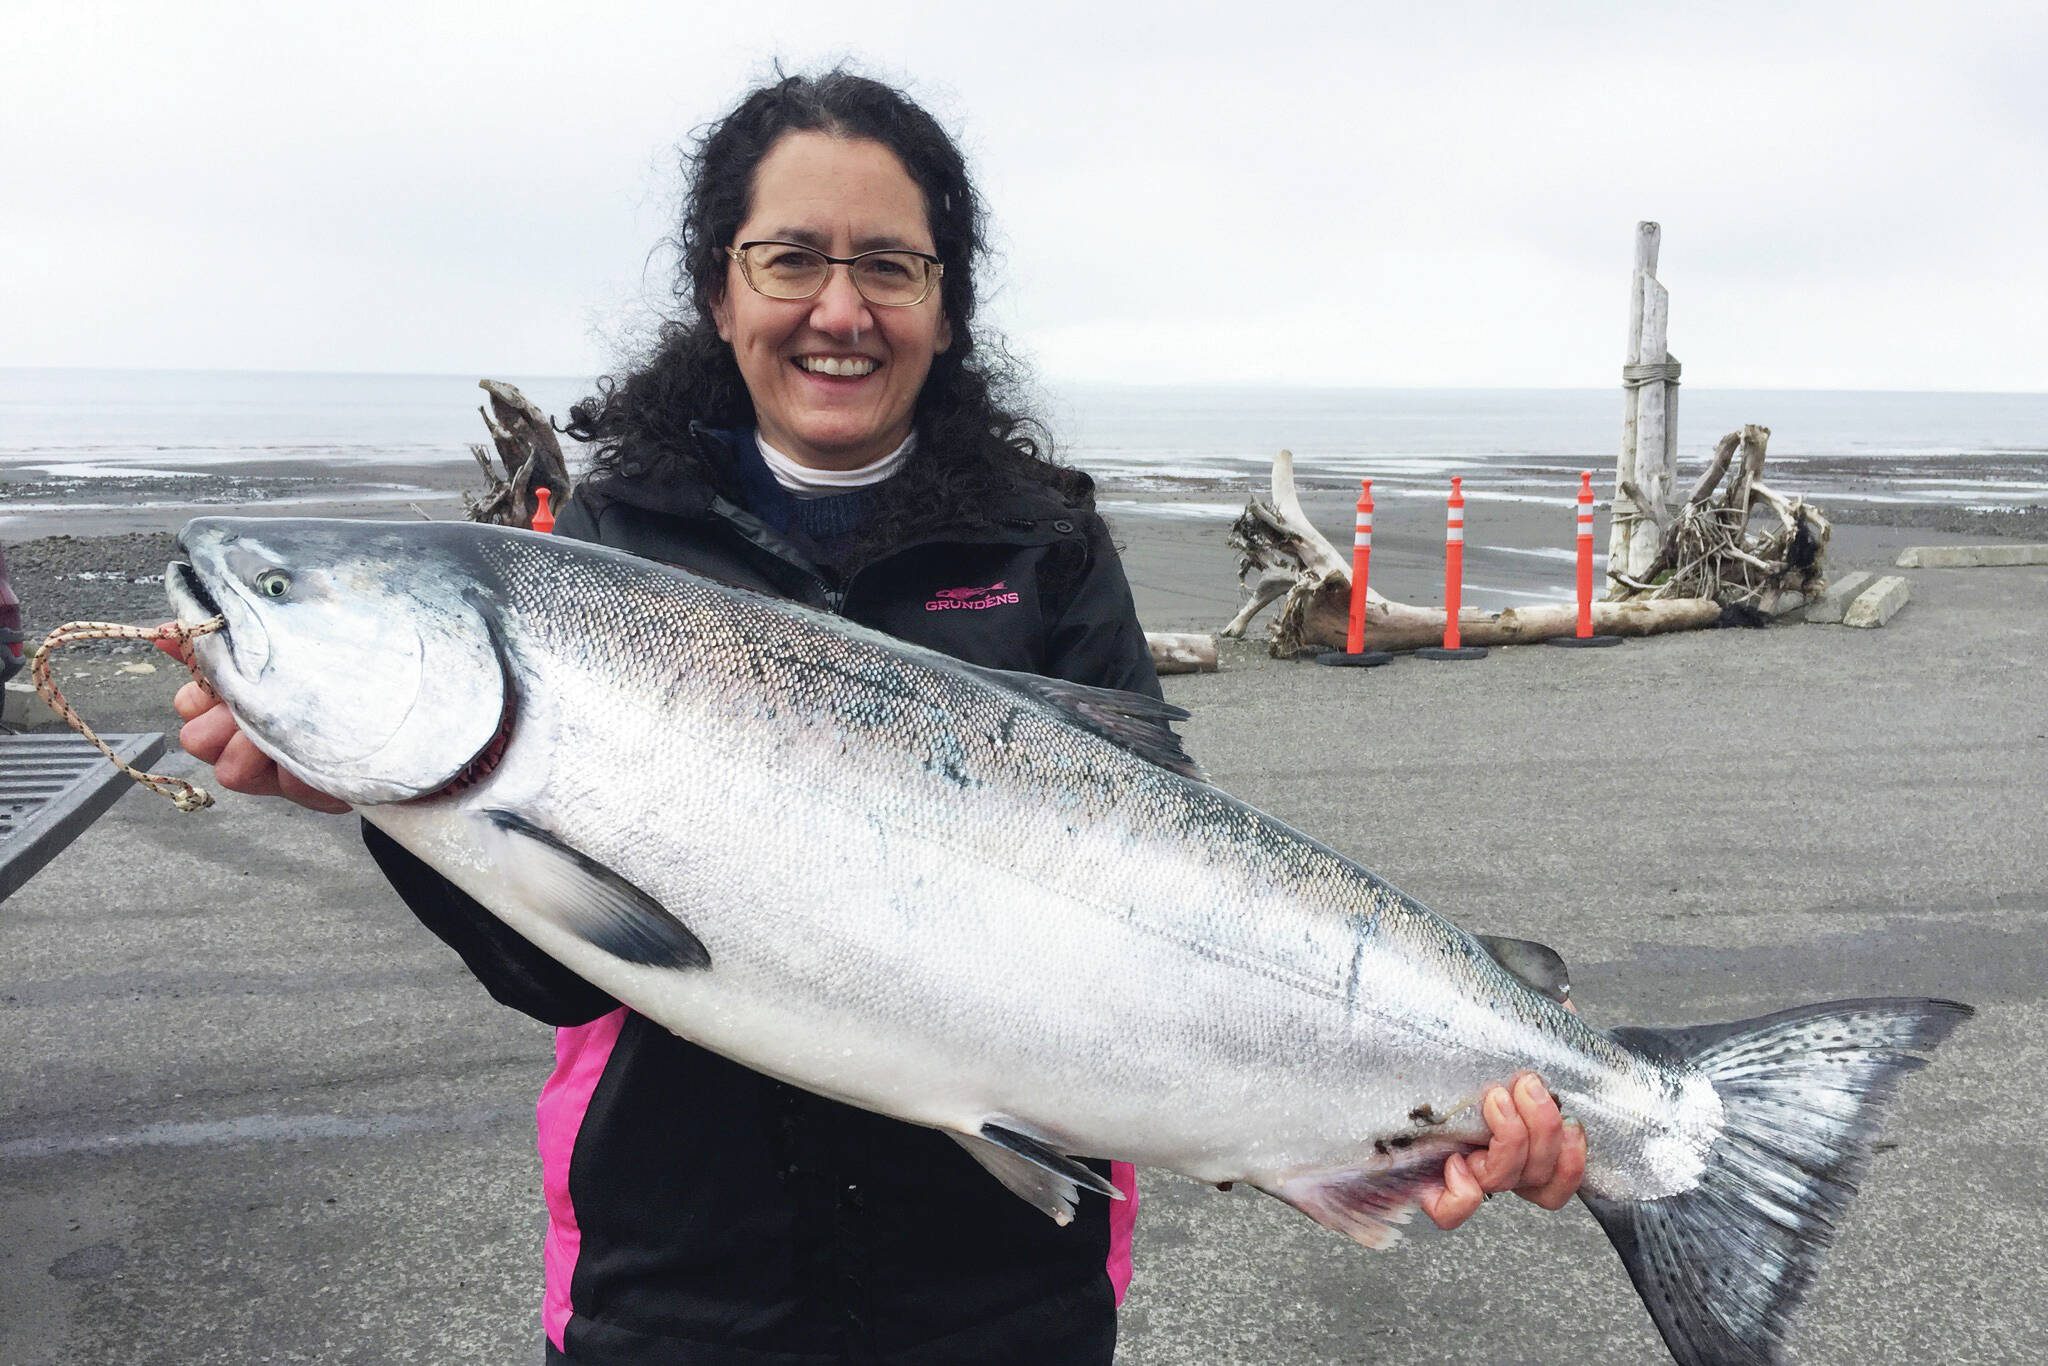 Derotha Ferraro from the fishing vessel Big Game poses with the king salmon she caught in the Anchor Point King Salmon Calcutta on Sunday, May 12, 2019, in Anchor Point, Alaska. (Photo courtesy of Bill Scott)